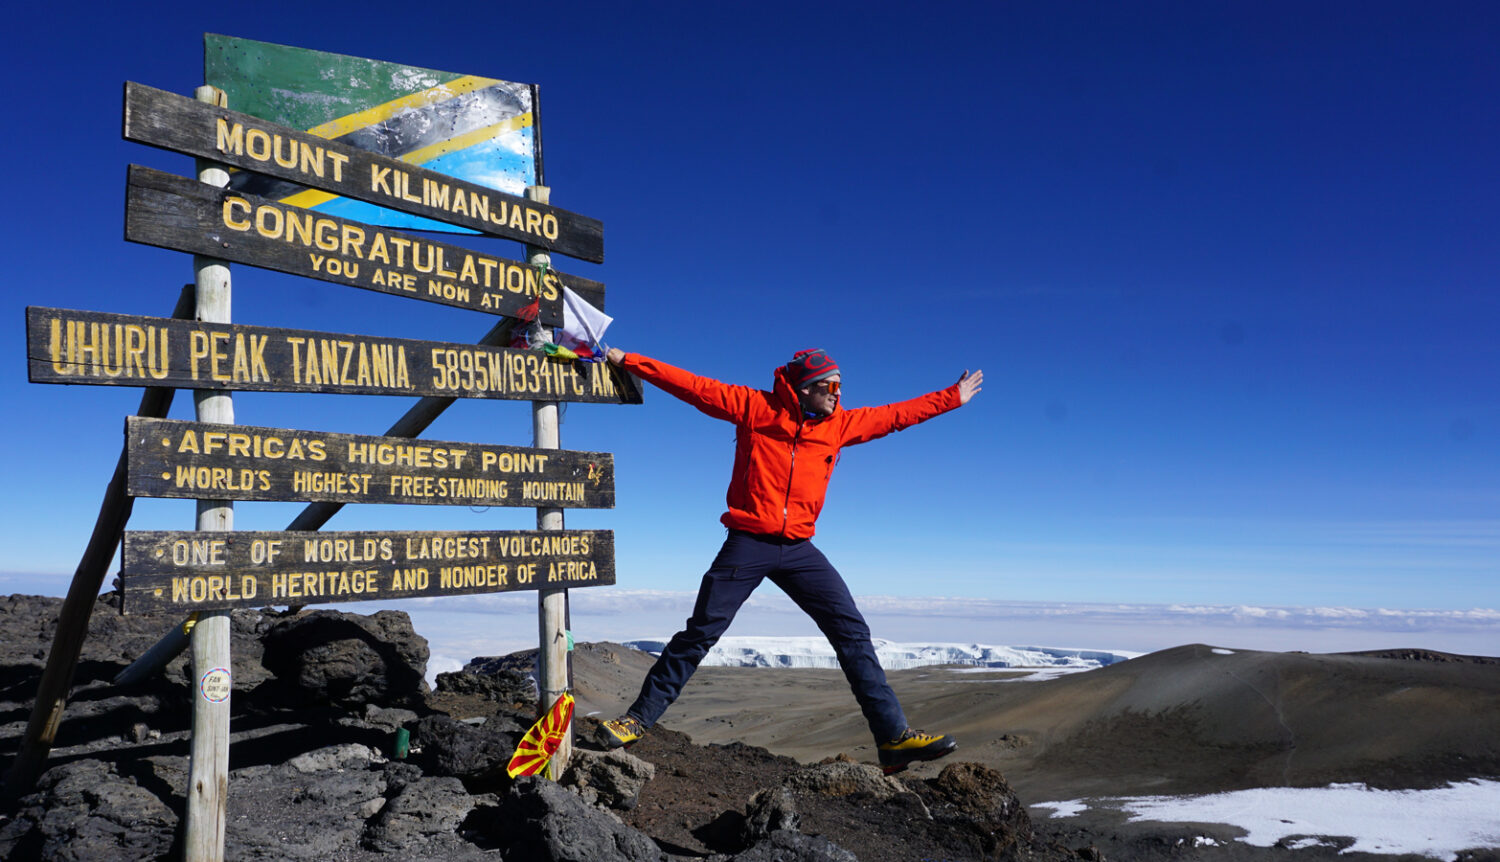 Mount Kilimanjaro Climb Machame Route 7 Days is one of the most popular routes on Kilimanjaro and a favorite for us